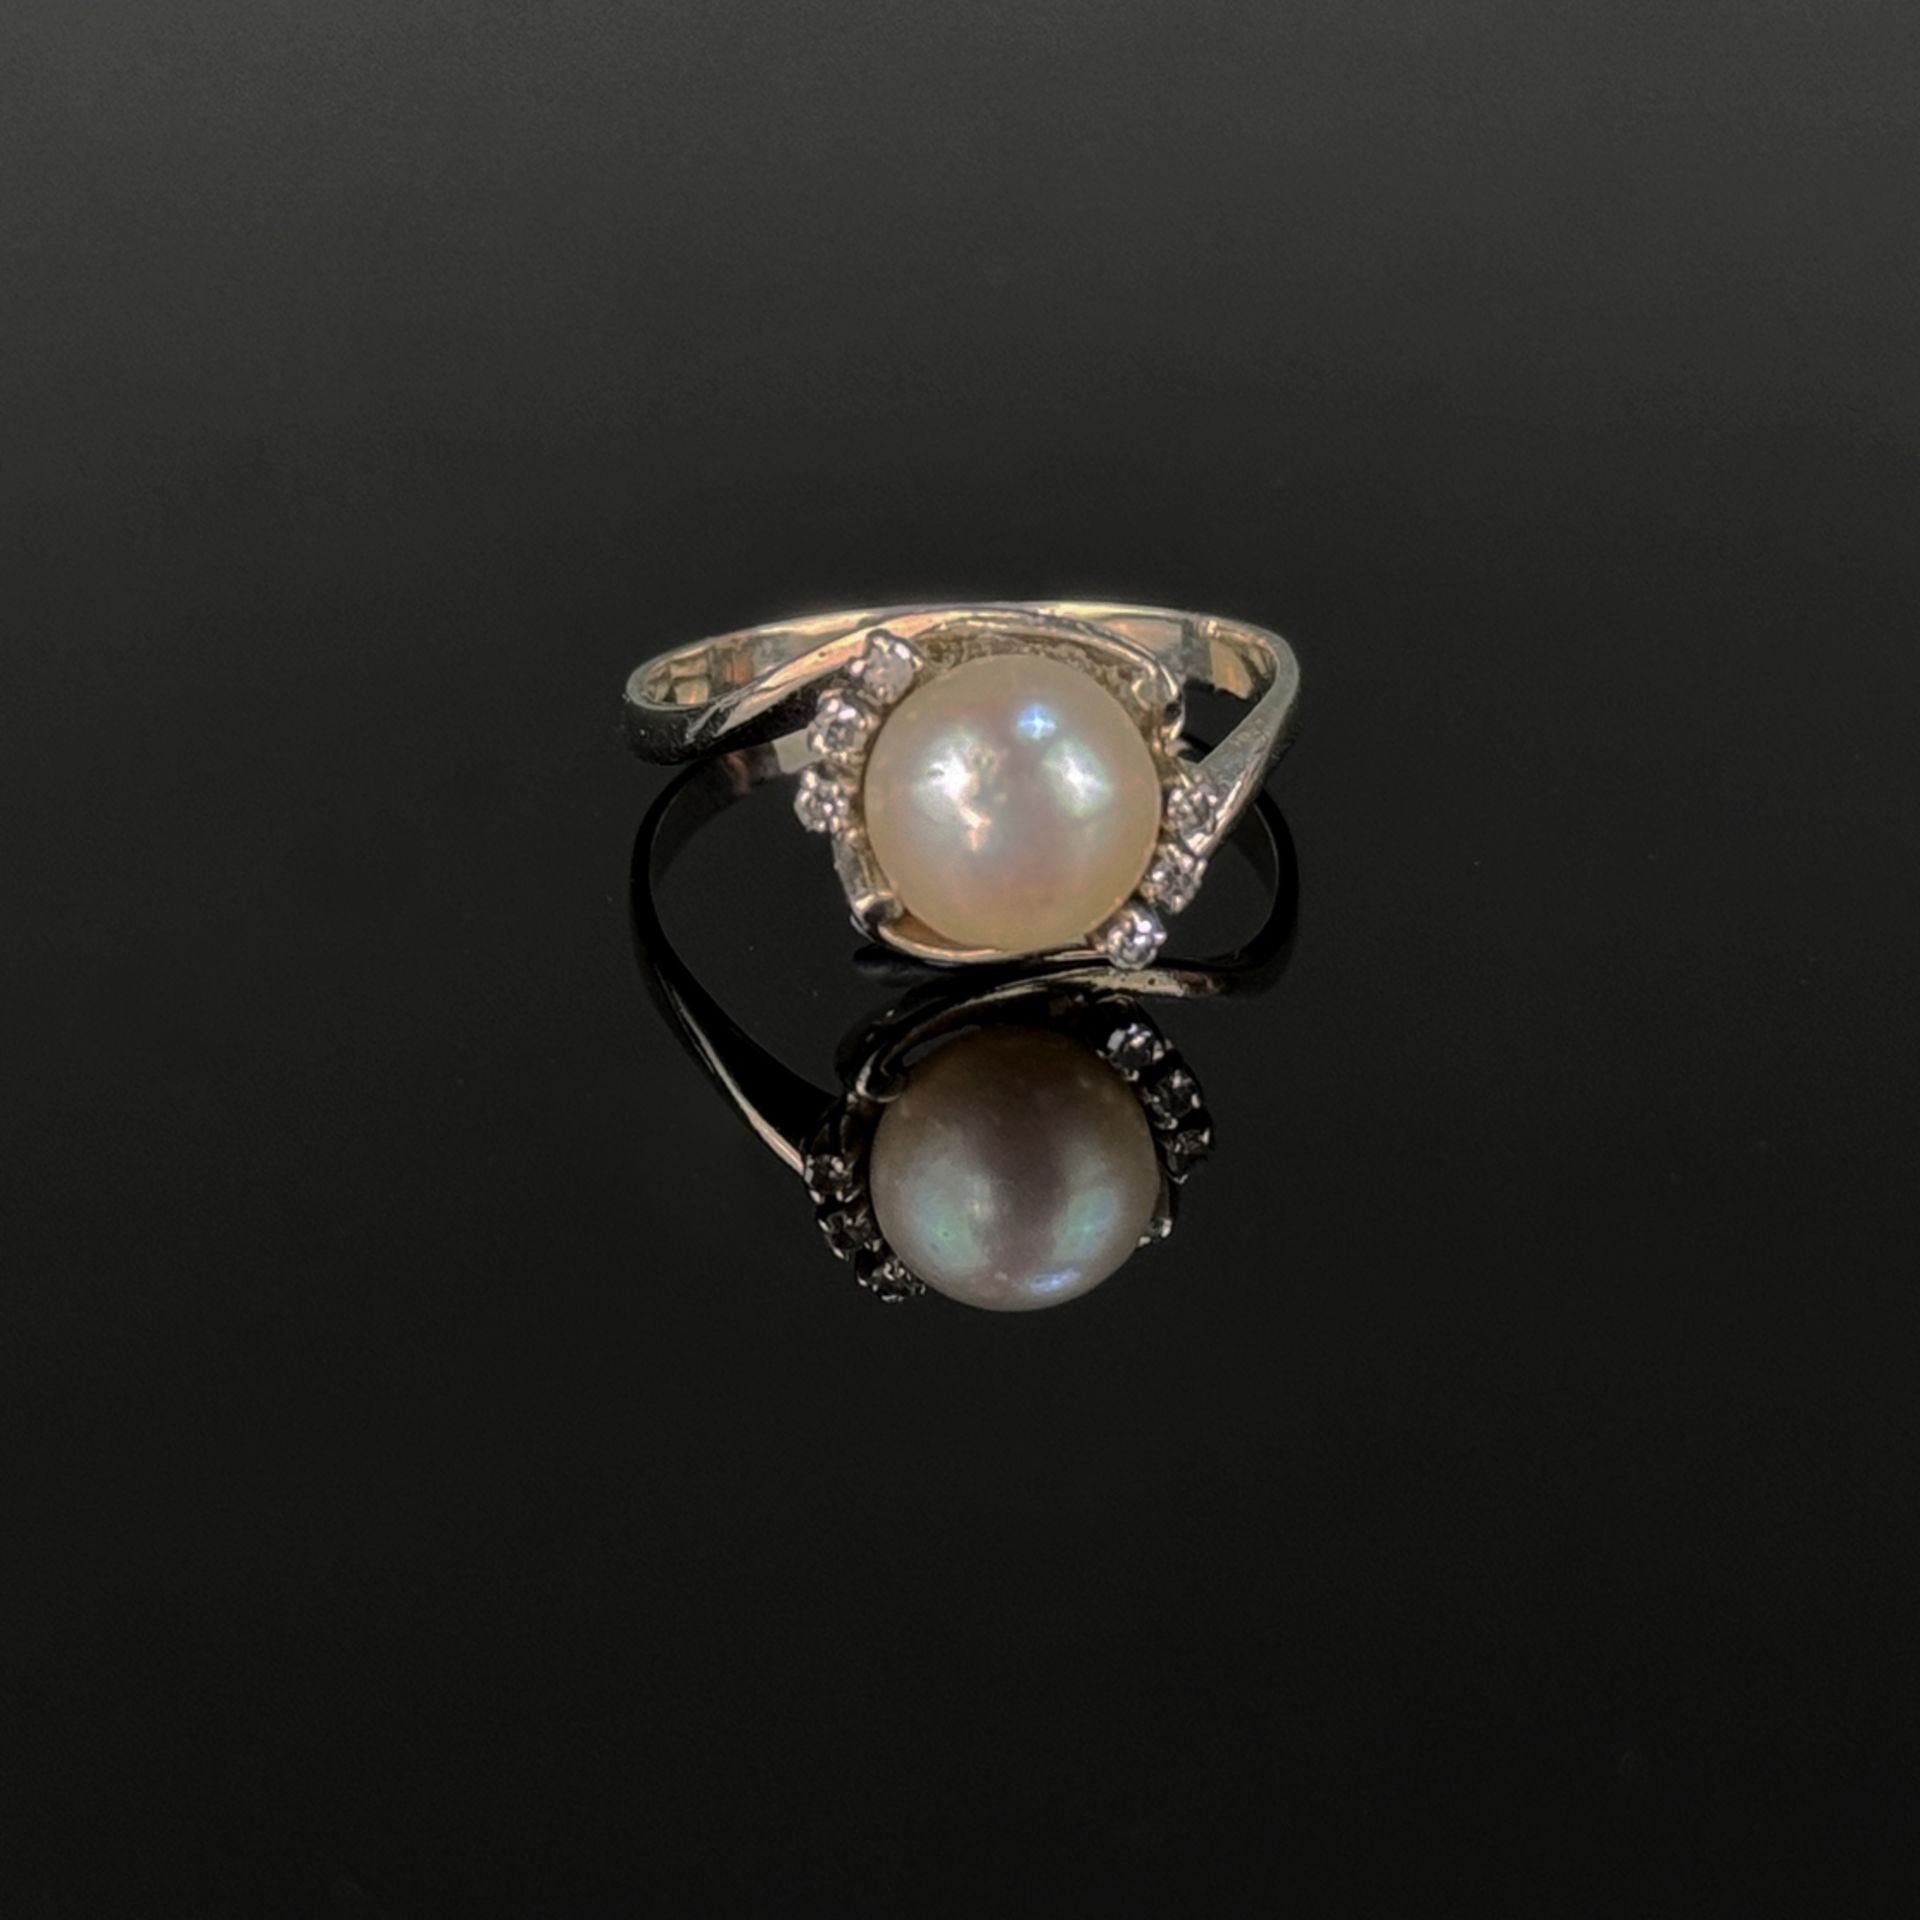 Pearl ring, 585/14K white gold (tested), 3.4g, white lustre pearl in the centre, diameter approx. 7 - Image 2 of 2